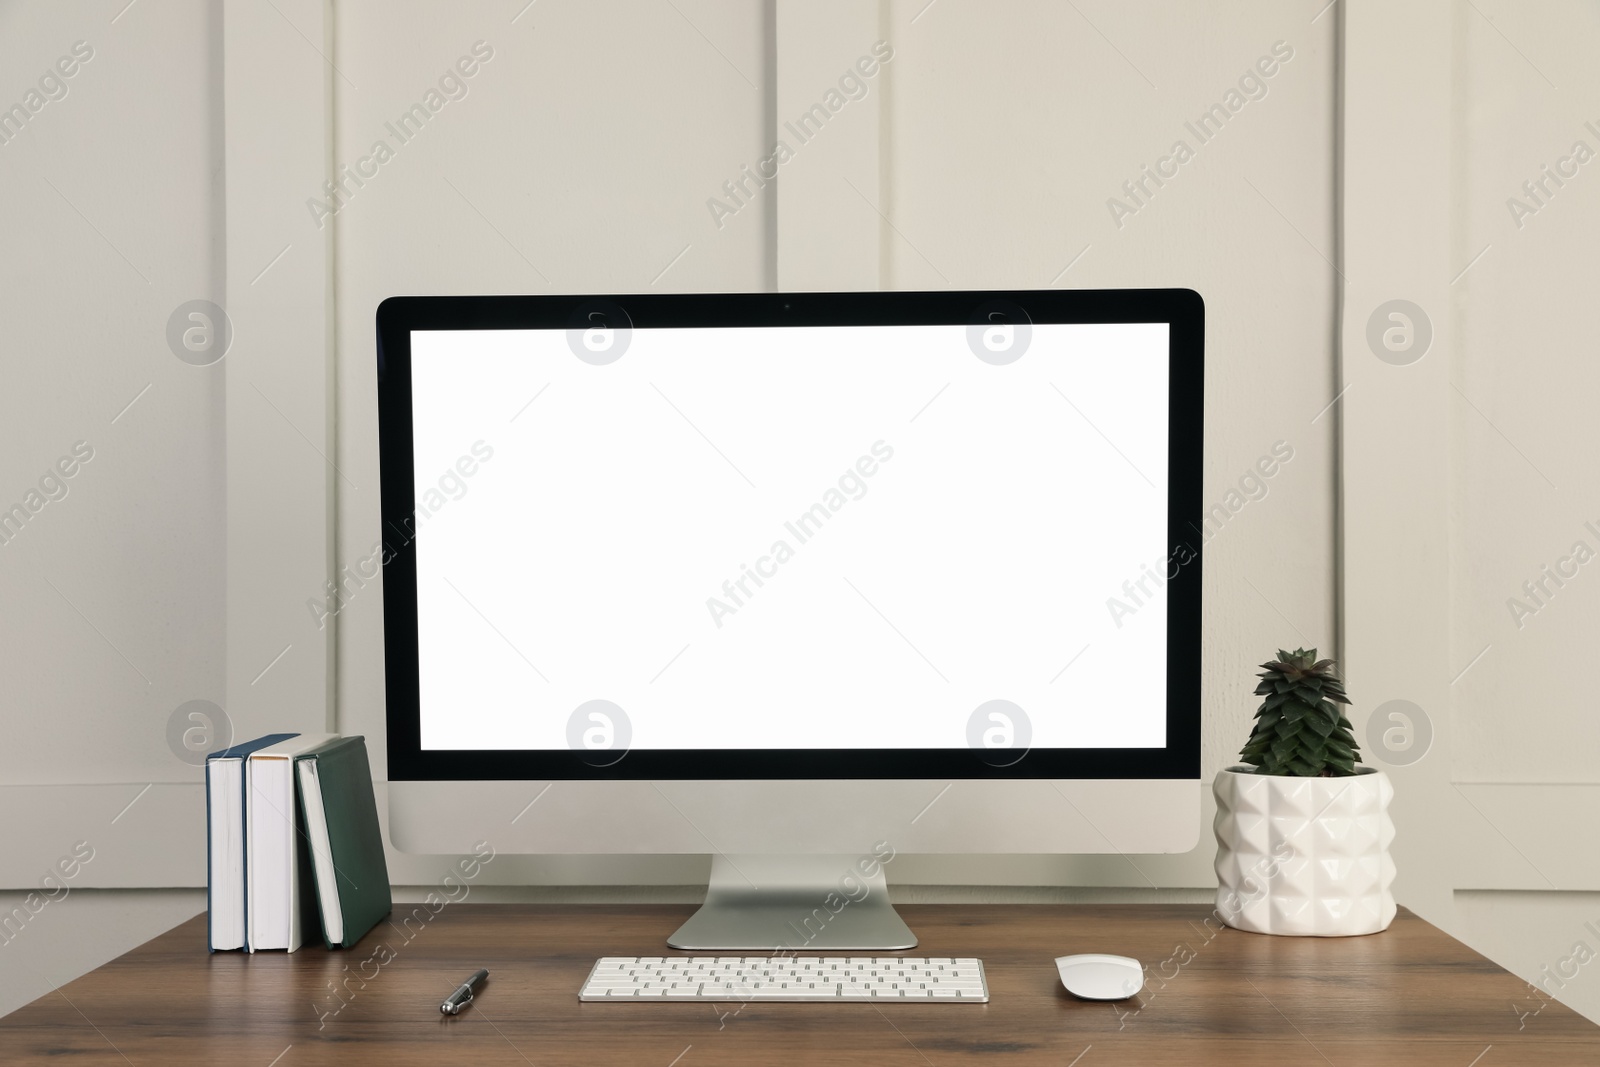 Photo of Modern computer, notebooks, pen and houseplant on wooden table near molding wall